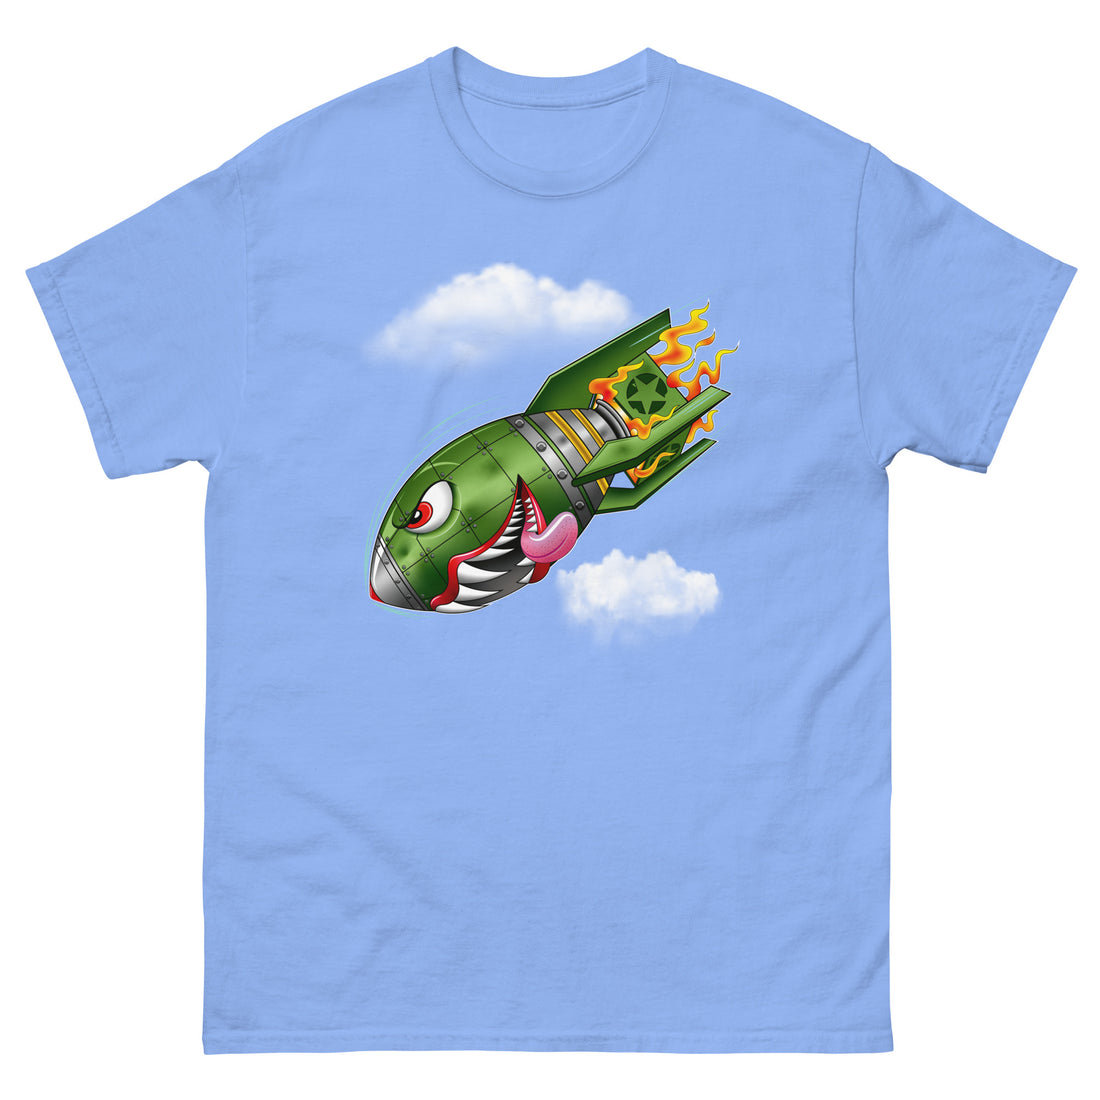 A periwinkle blue t-shirt with a military green neo-traditional bomb tattoo design. The bomb is falling with a look of determination in its eyes, an evil toothy grin, and its tongue hanging out of its mouth. Flames are coming from the back of the bomb, and some clouds are in the background.